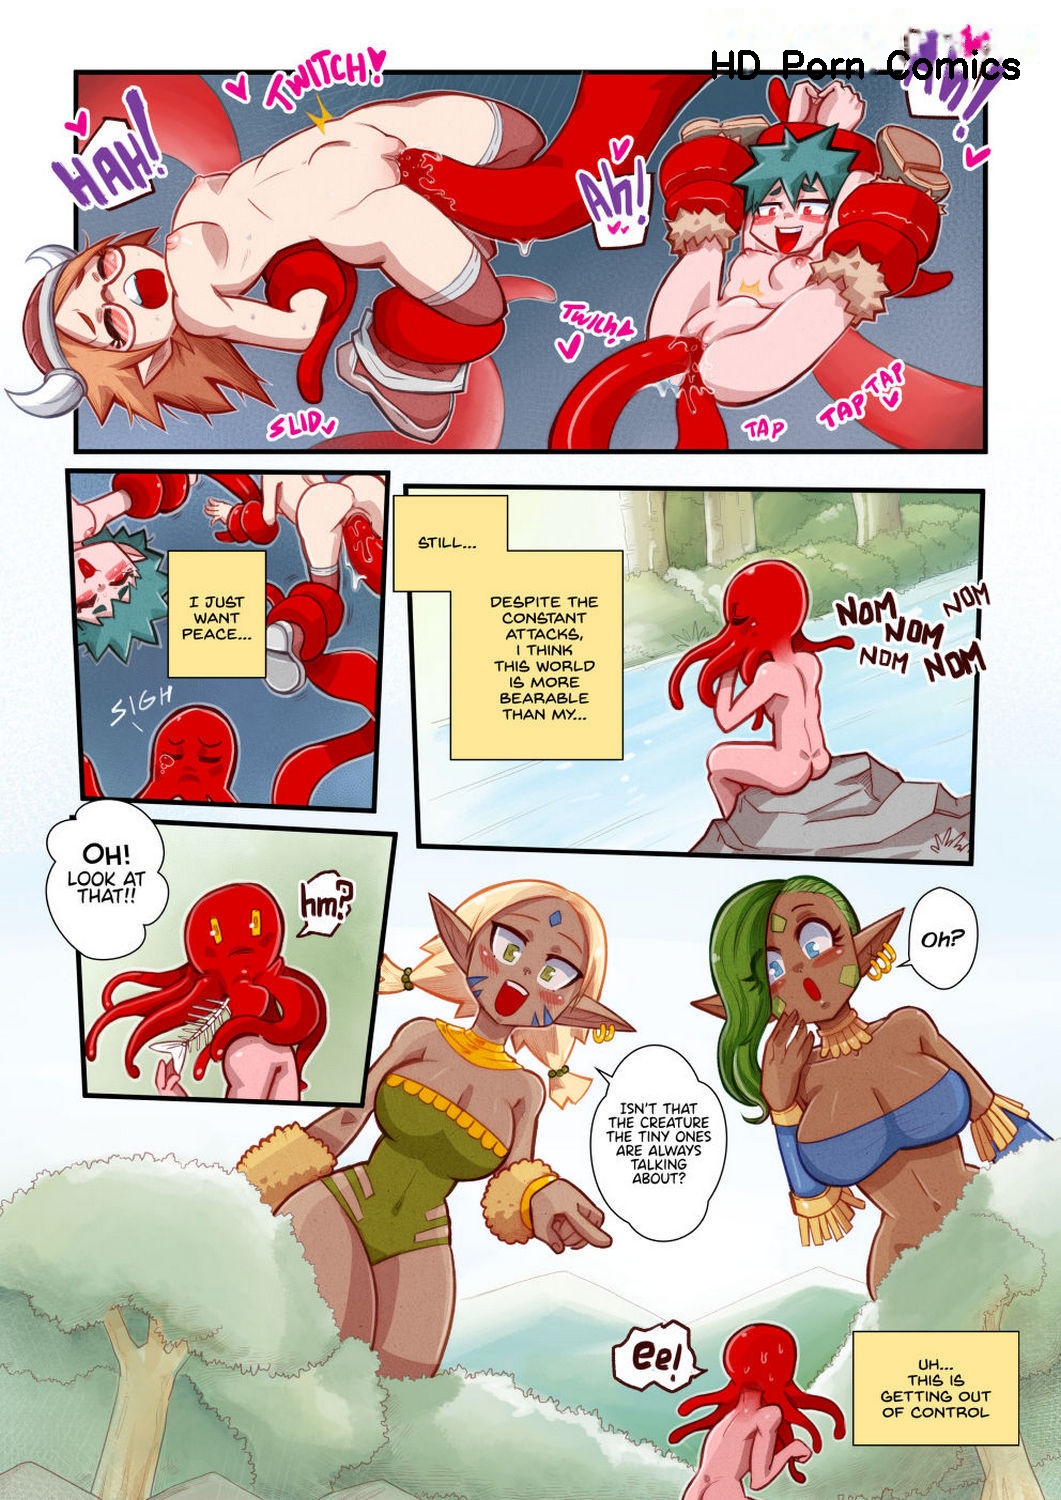 Tiny Tentacle Porn - Life As A Tentacle Monster In Another World comic porn - HD Porn Comics